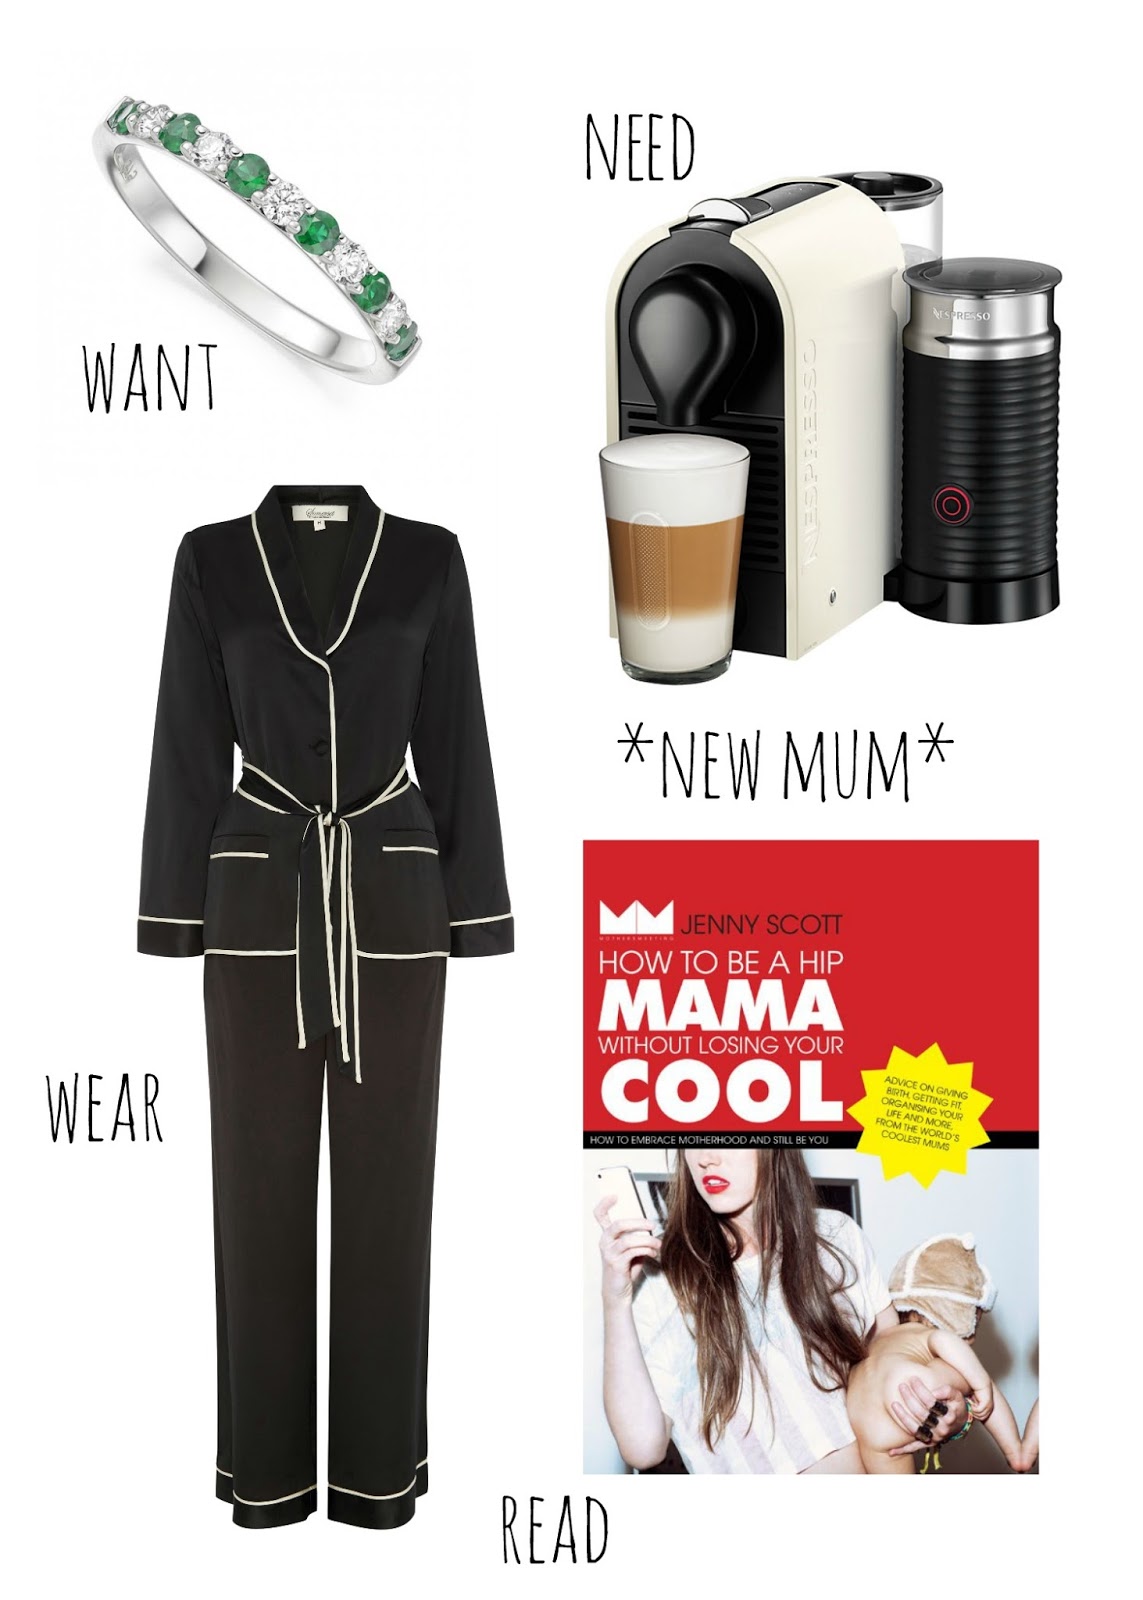 mamasVIB | V. I. BUYS: The simple Christmas gift guide for busy mums under pressure! Part 1 *LADIES FIRST*  gift guide, christmas gift guide, simple gifts, want need, wear read gifts, the gift philosophy, luxury gift ideas, bonita turner, stylist, mamasvib blog, blog, christmas ideas, styling